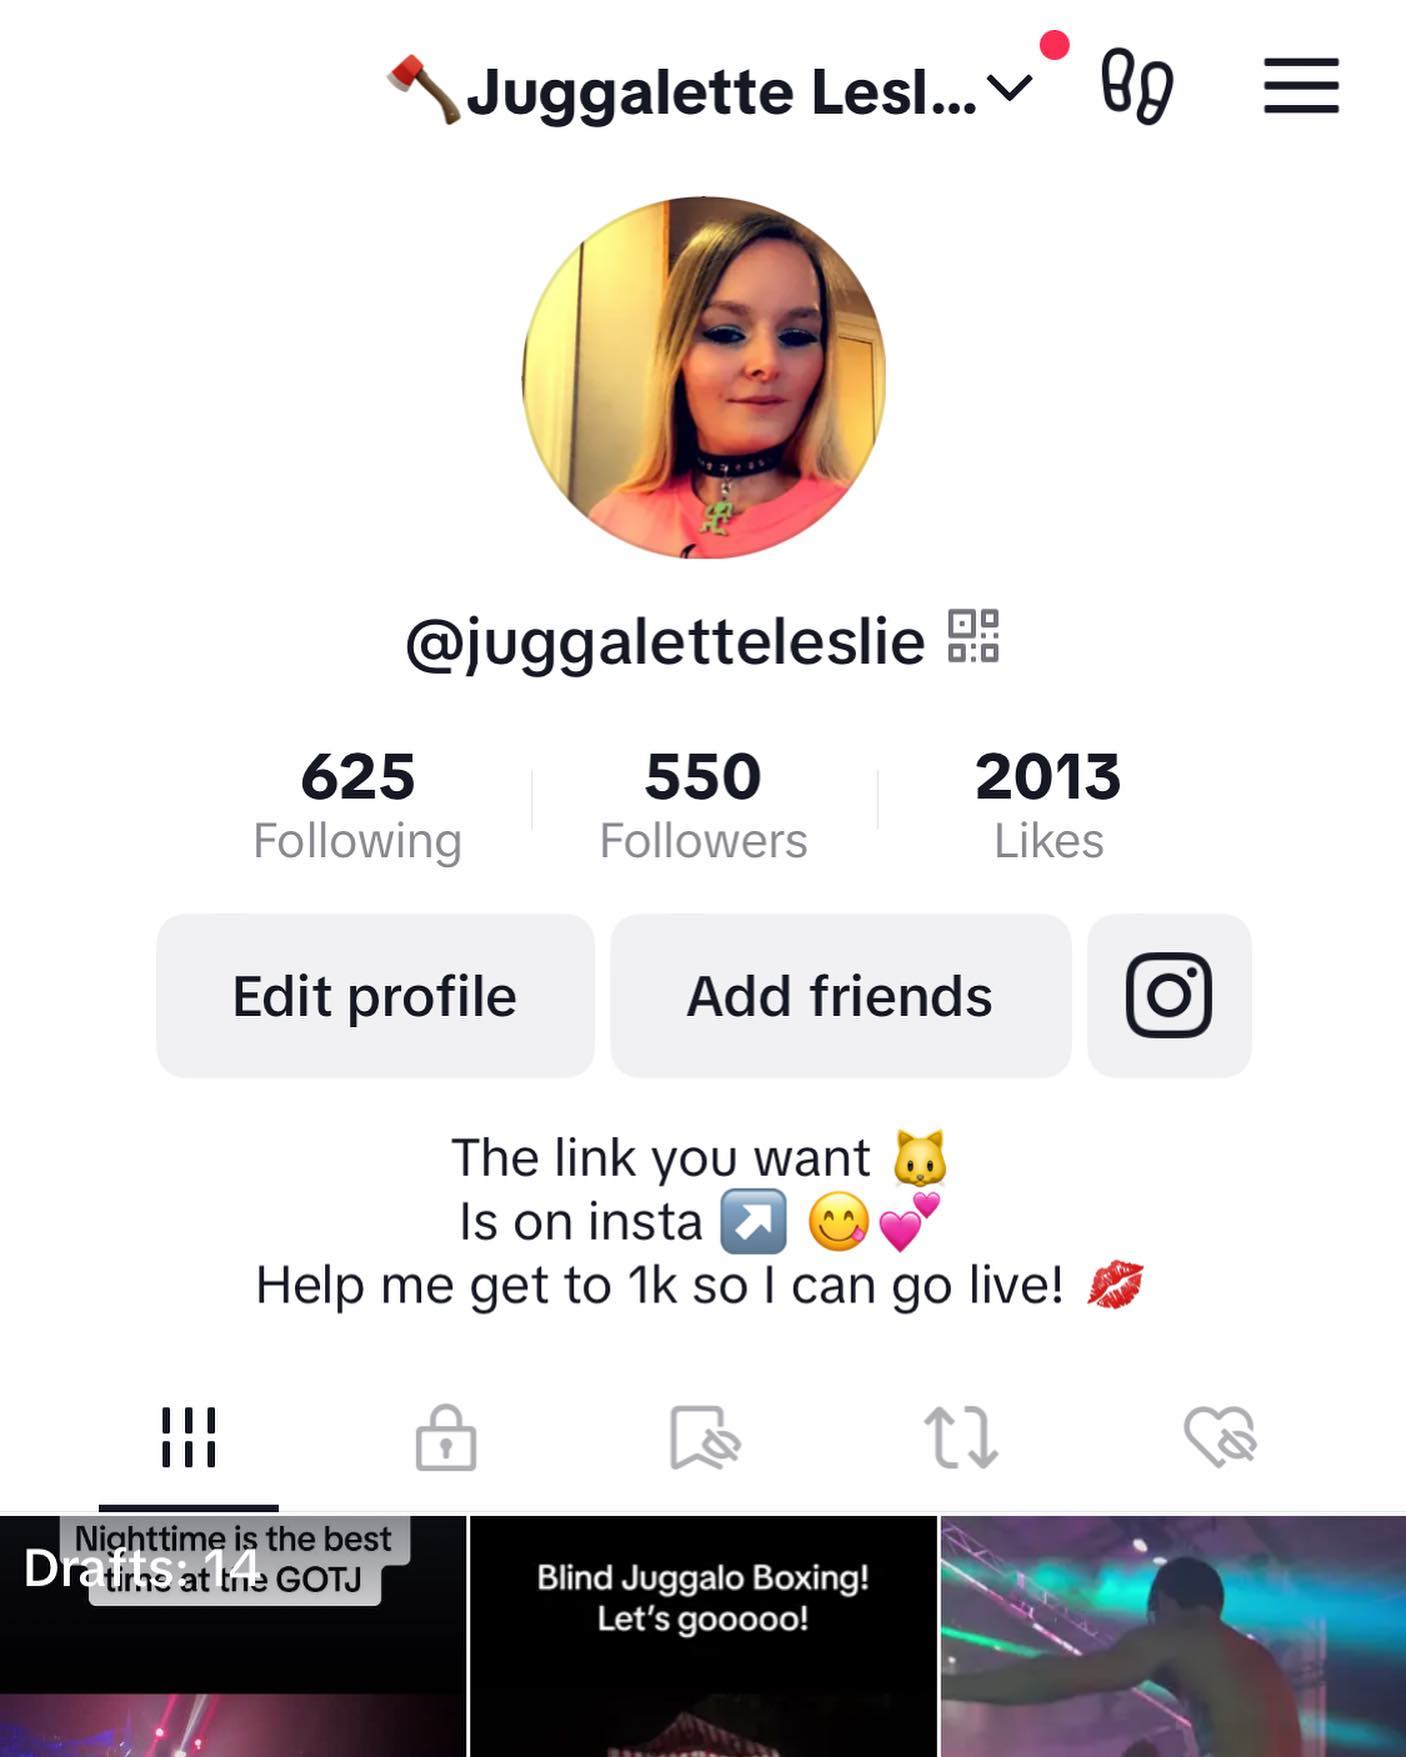 Wanna get hype for #gotj ? Follow me on TikTok! I’m posting multiple videos from past #juggalogathering If you went you might even see yourself in them! #gatheringofthejuggalos